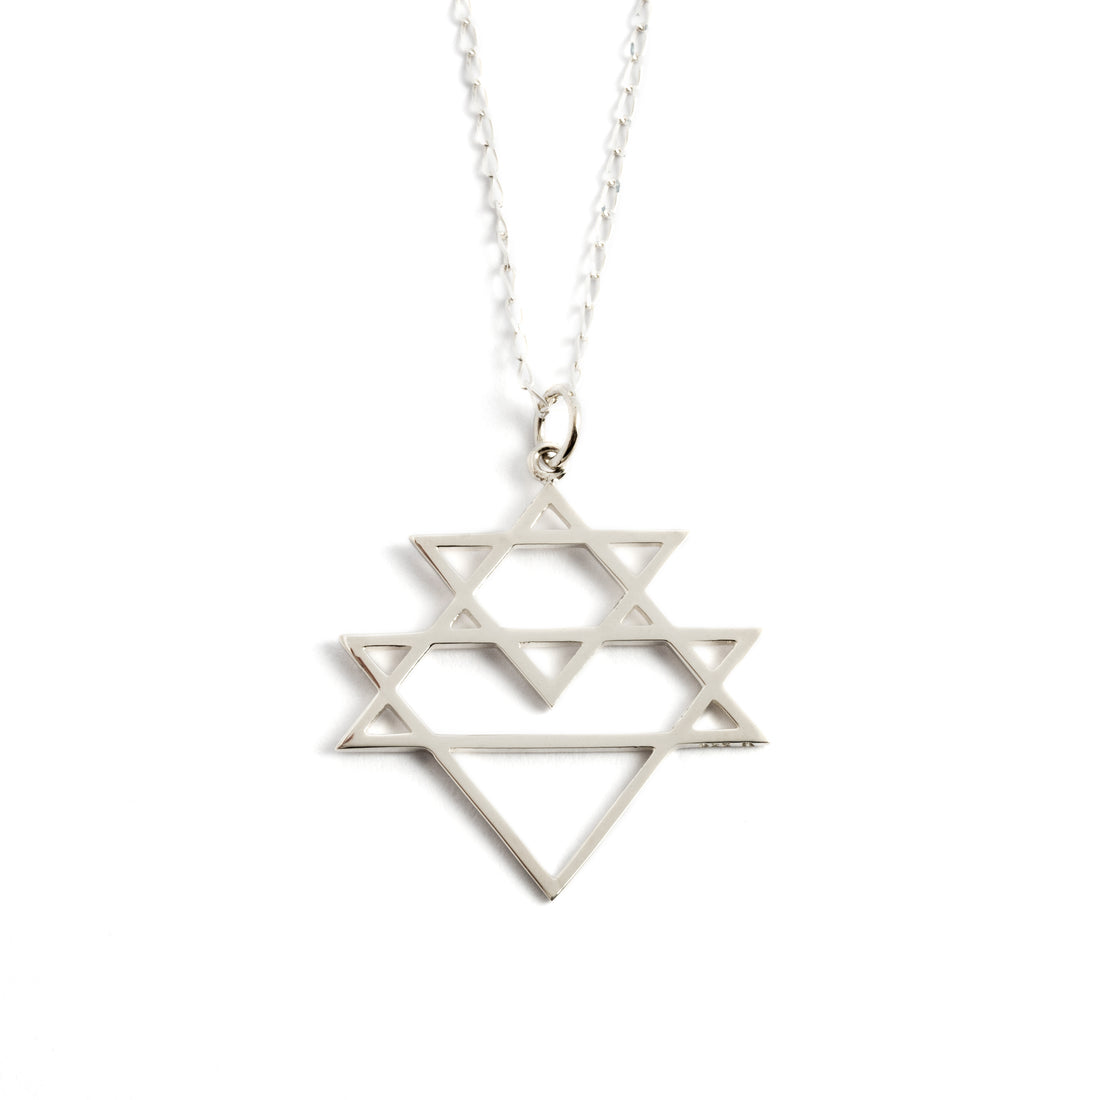 Open Sri Yantra Necklace frontal view